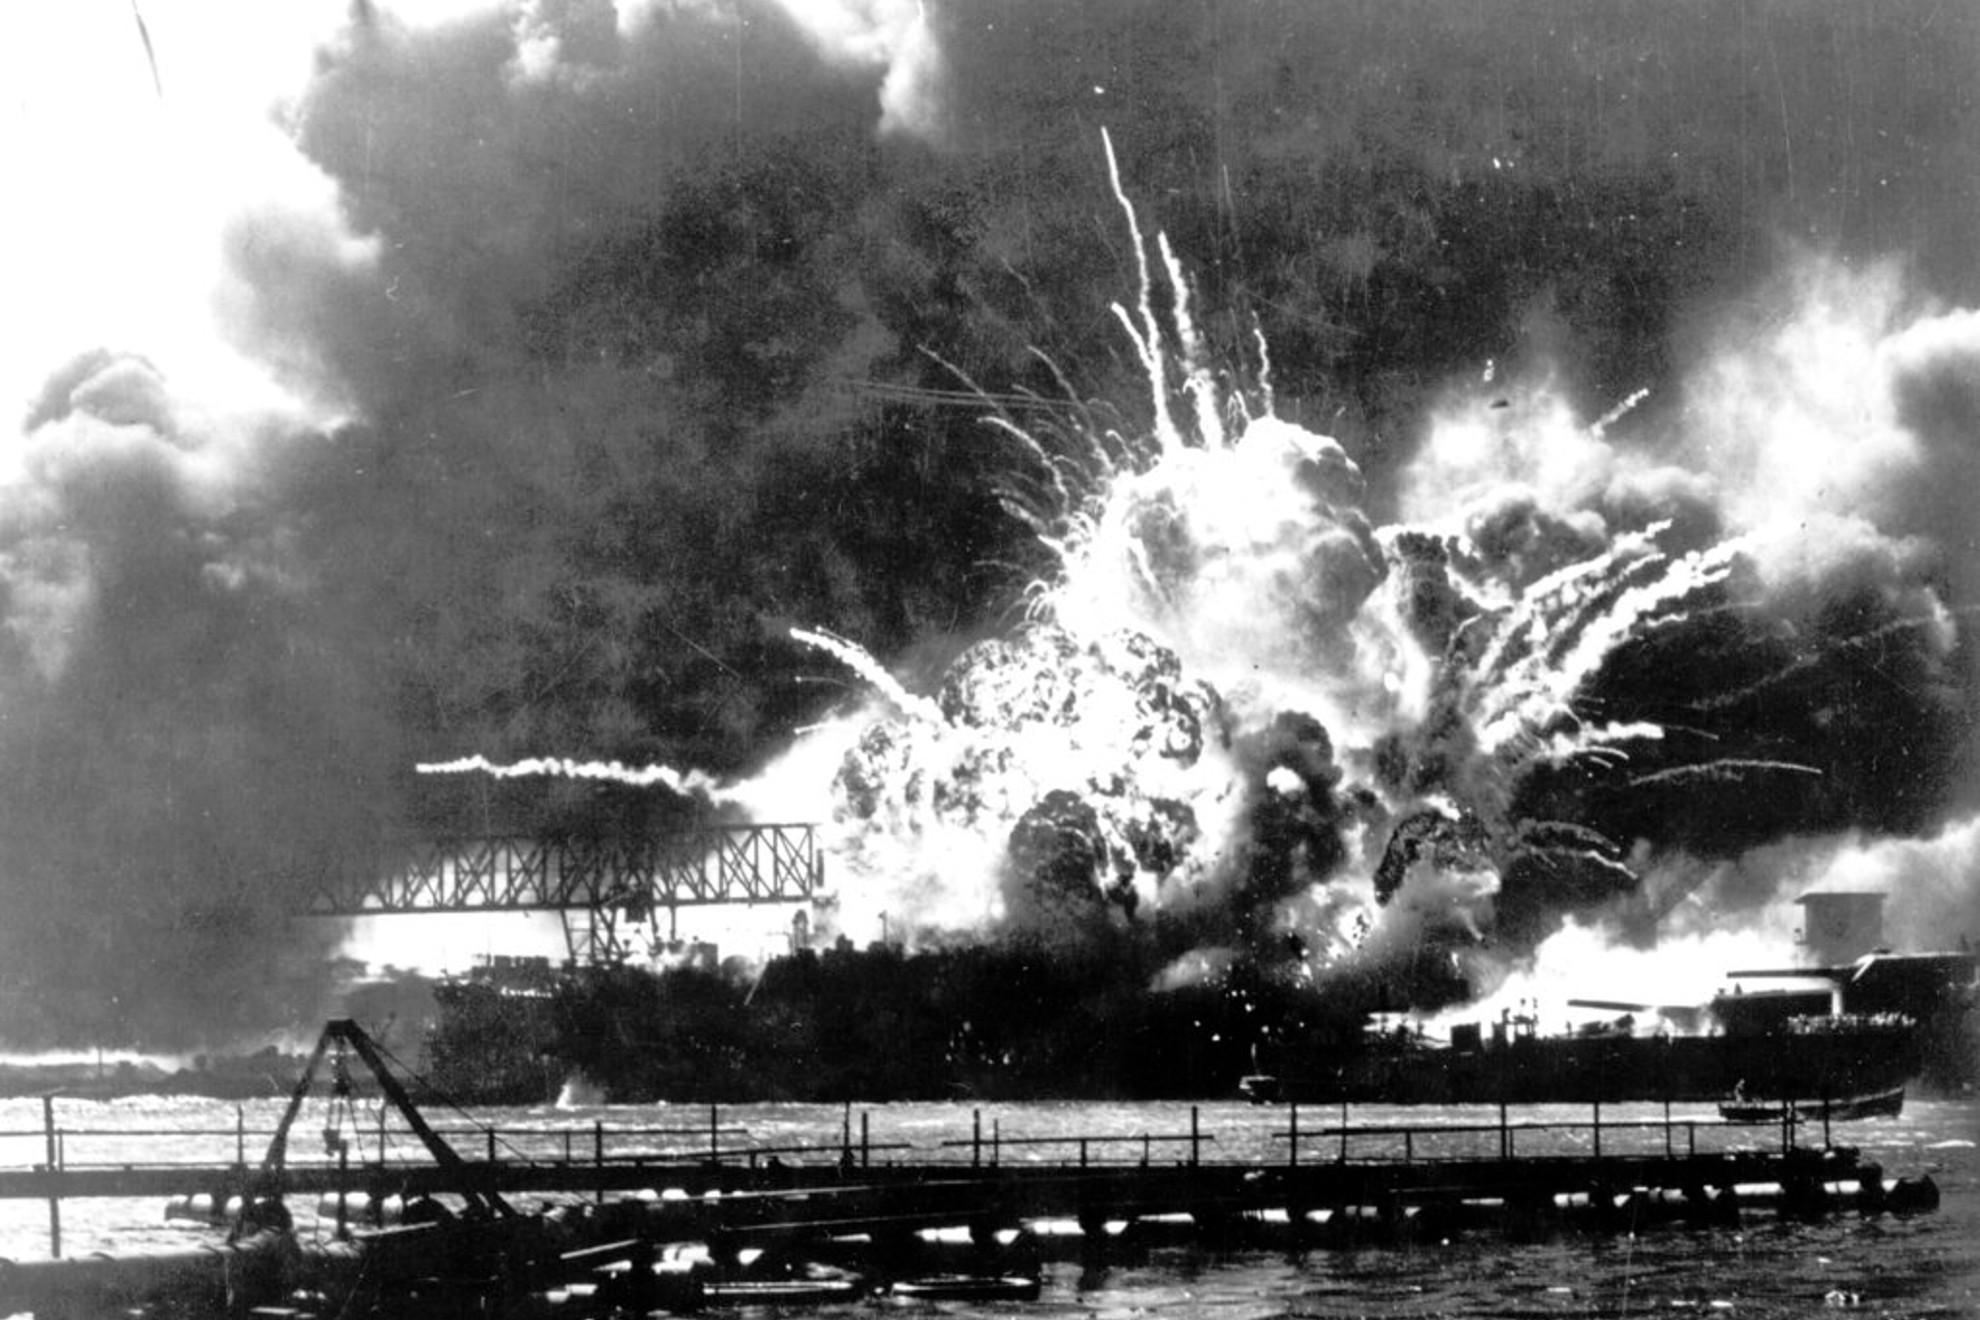 The destroyer USS Shaw explodes after being hit by bombs during the Japanese surprise attack on Pearl Harbor